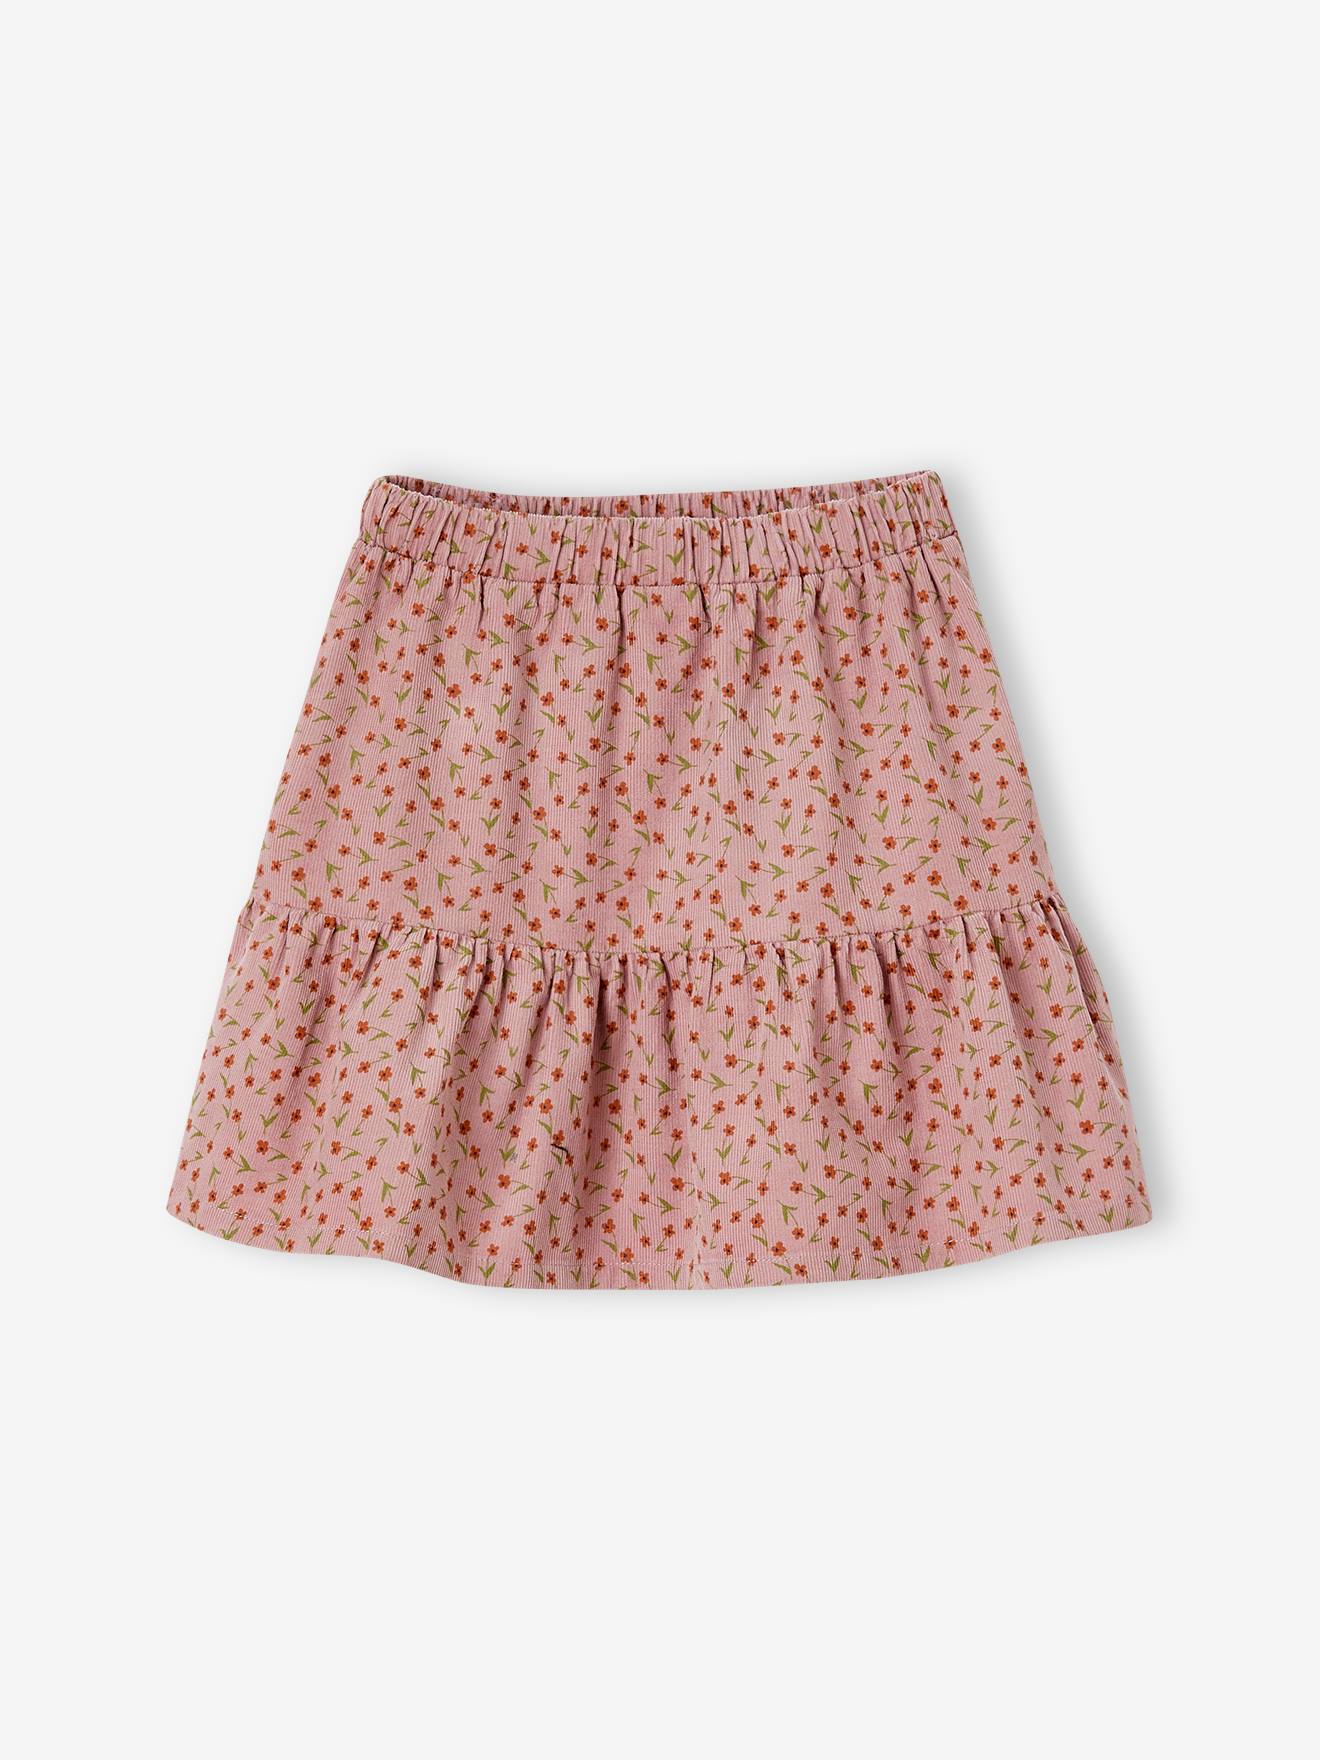 Corduroy Skirt with Ruffle & Floral Print for Girls old rose